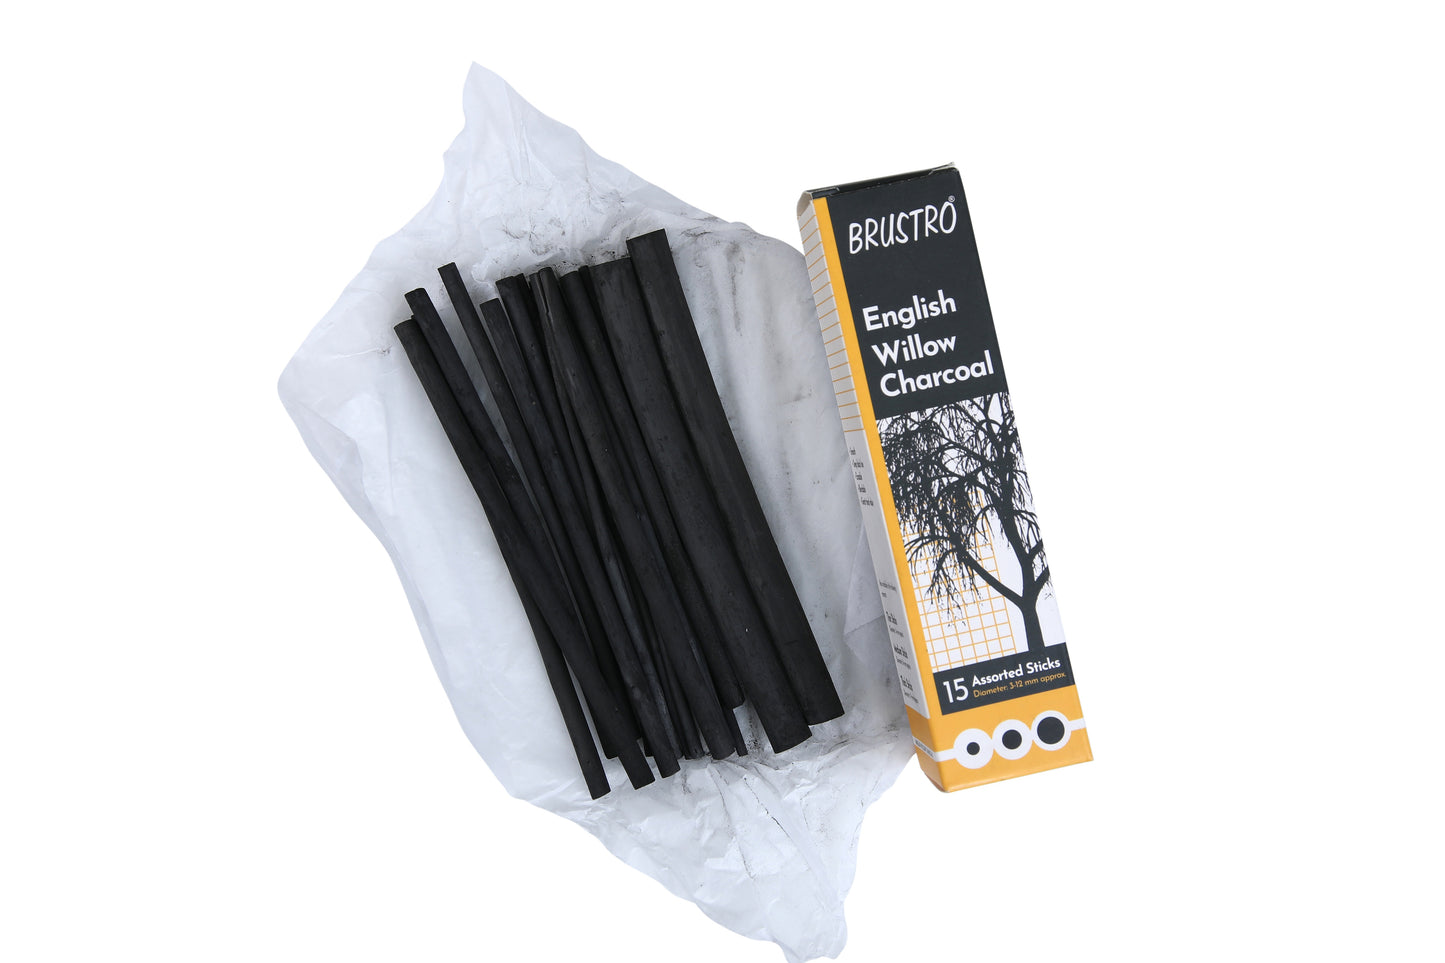 Brustro English Willow Charcoal Assorted (15 Sticks)